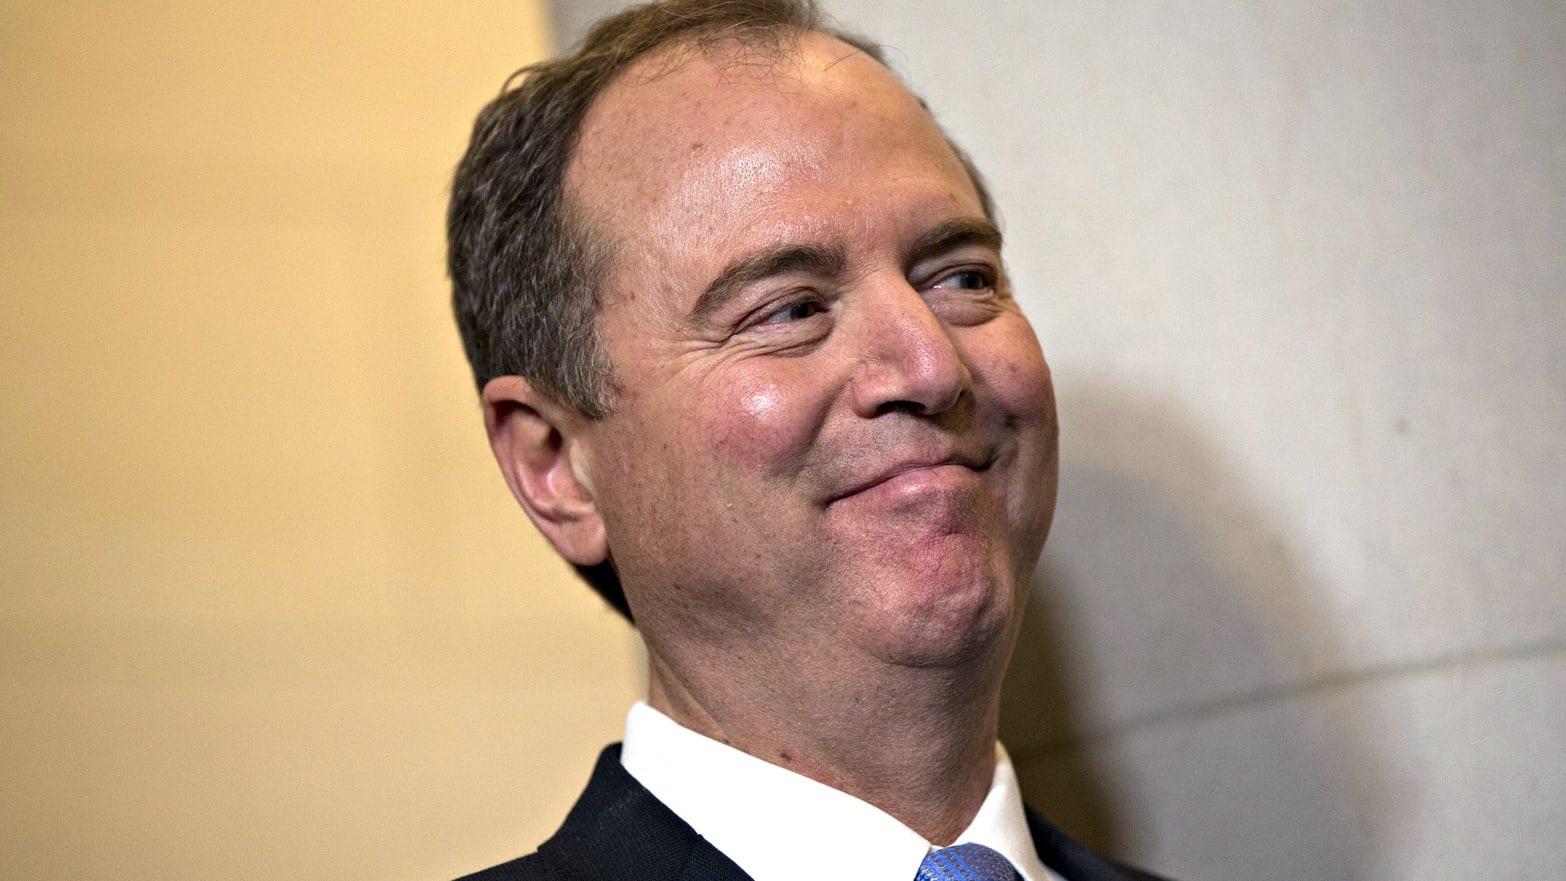 ?? Nationalist Pet Lover ??? on Twitter: "@RepAdamSchiff you got some ‘splainin to do...?Well I was there and I saw what you did, I saw it with my own two eyes??So you can wipe off that grin, I know where you've beenIt's all been a pack of lies??And I can feel it coming in the air tonight, oh Lord?… https://t.co/0uyDlAWpCy"